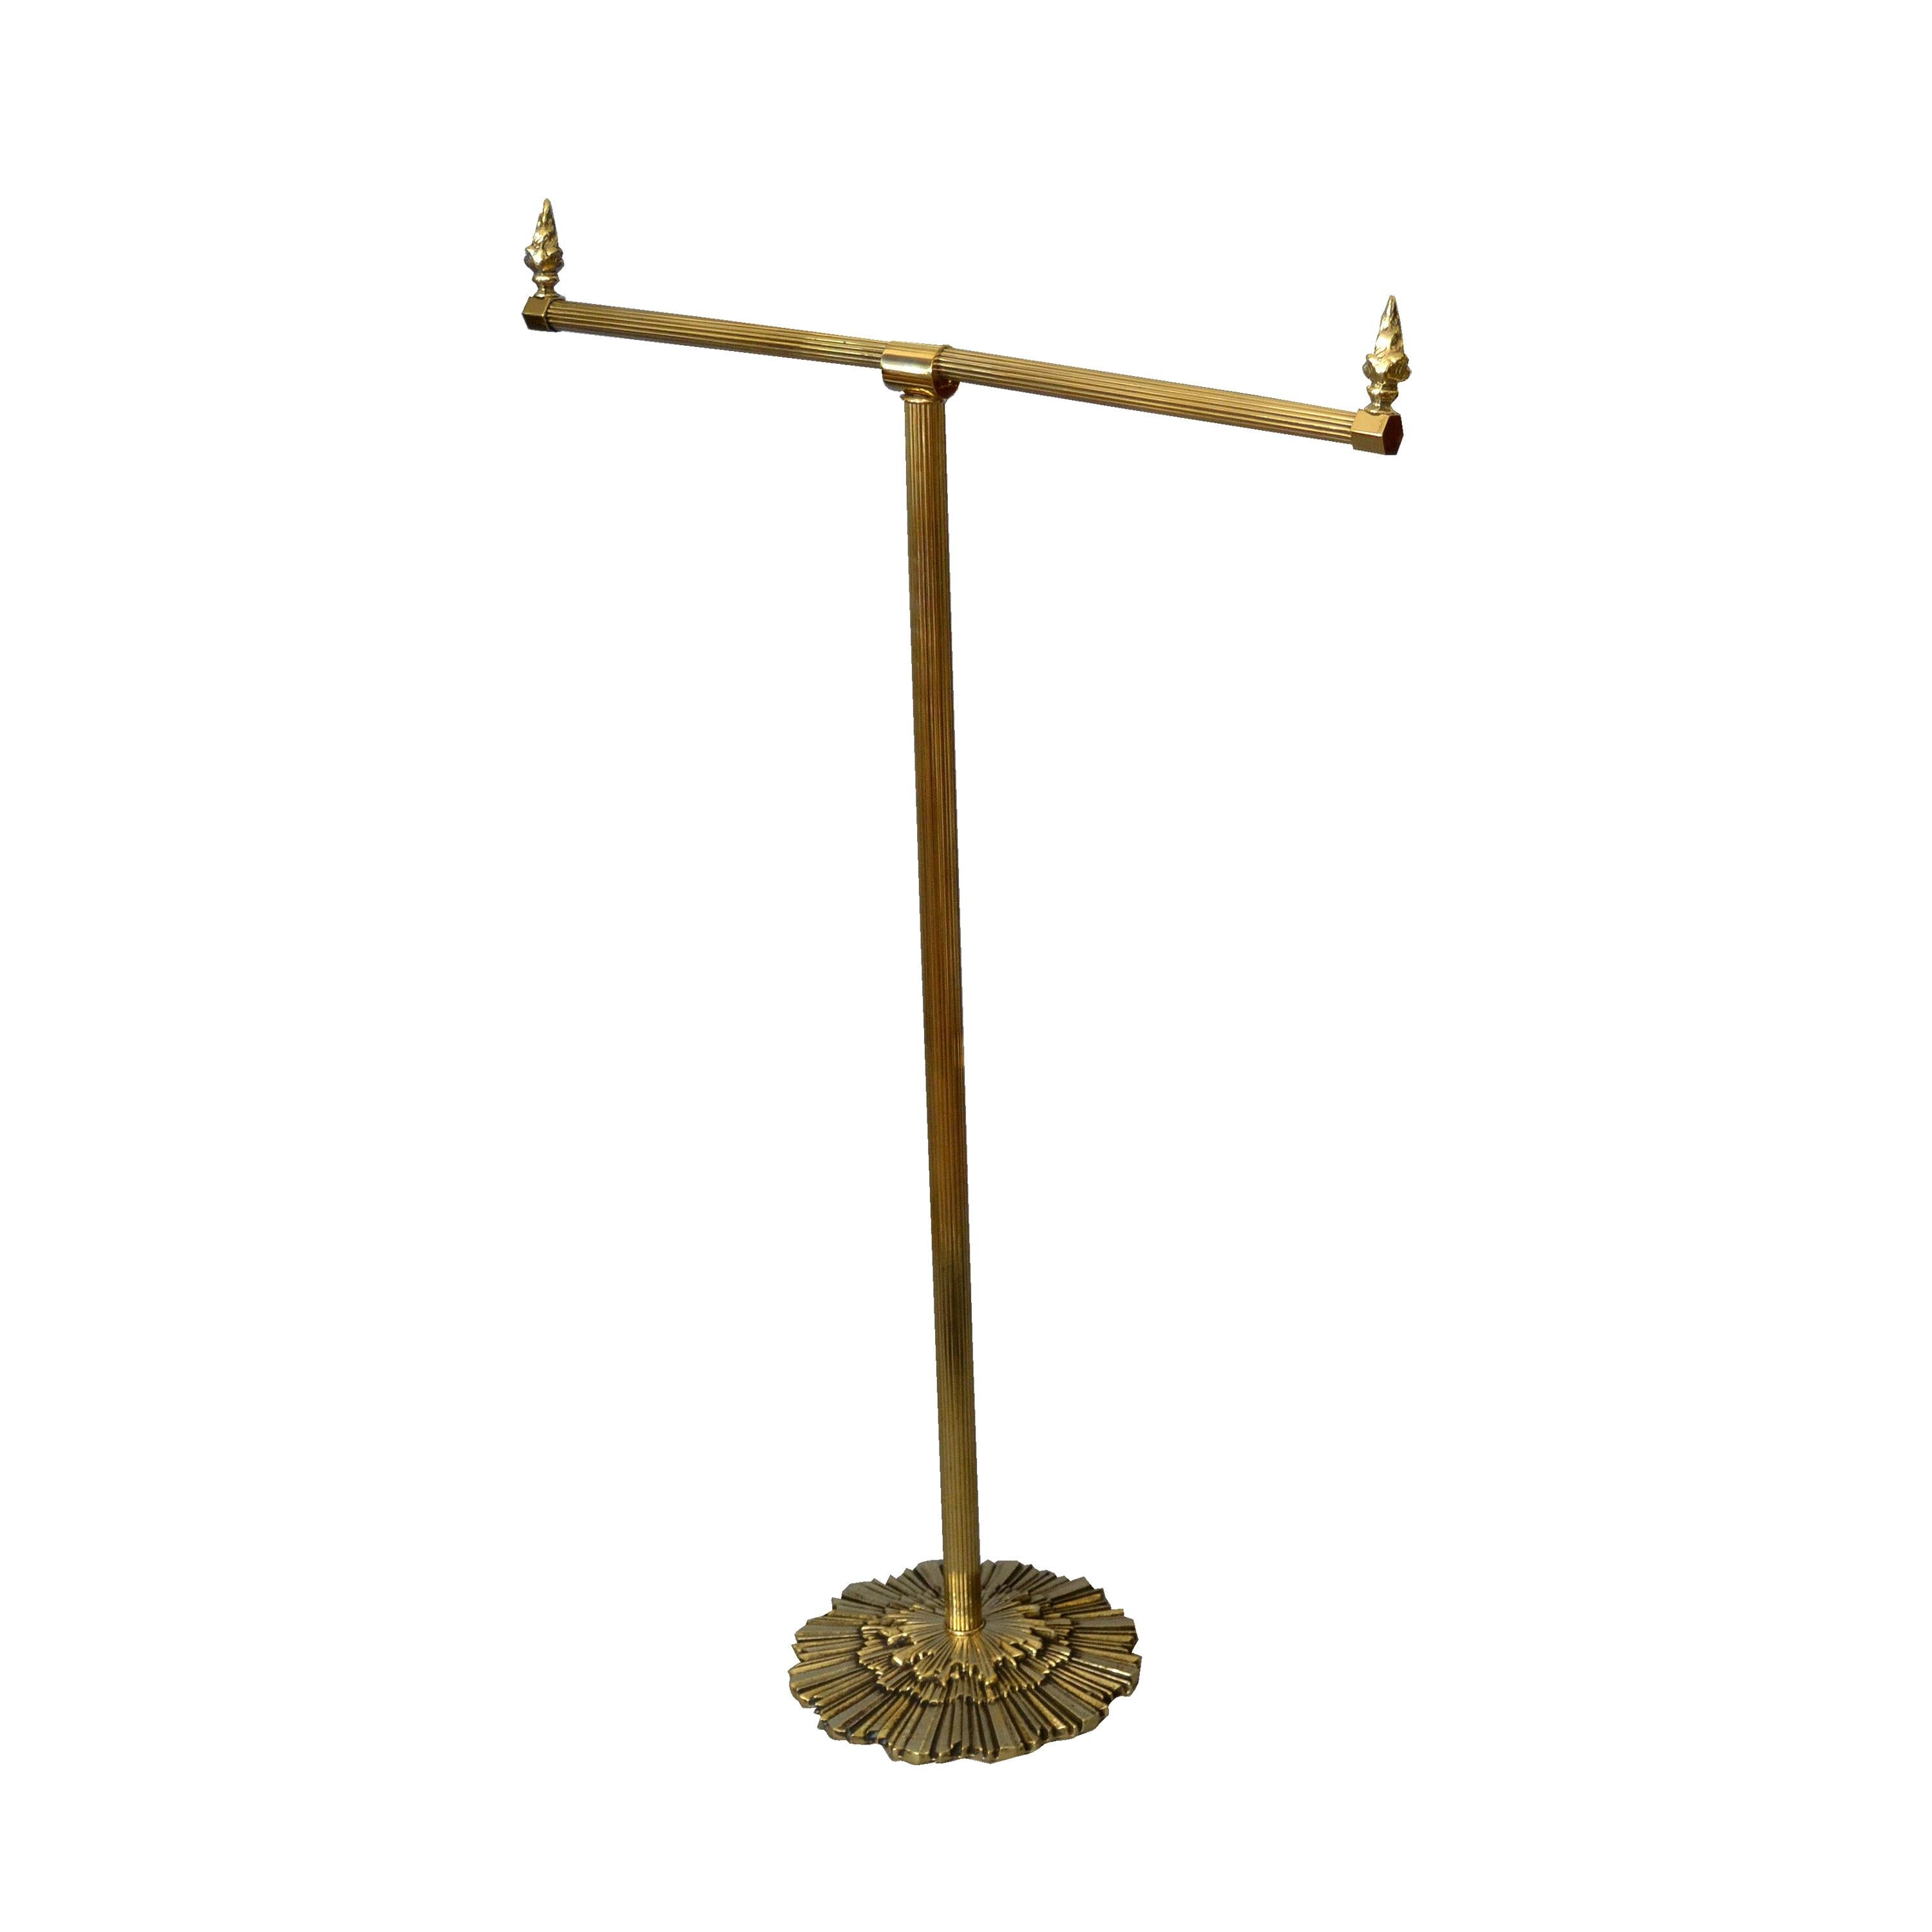 Antique British Colonial Bronze Pedestal Towel Rack, Stand Made in England